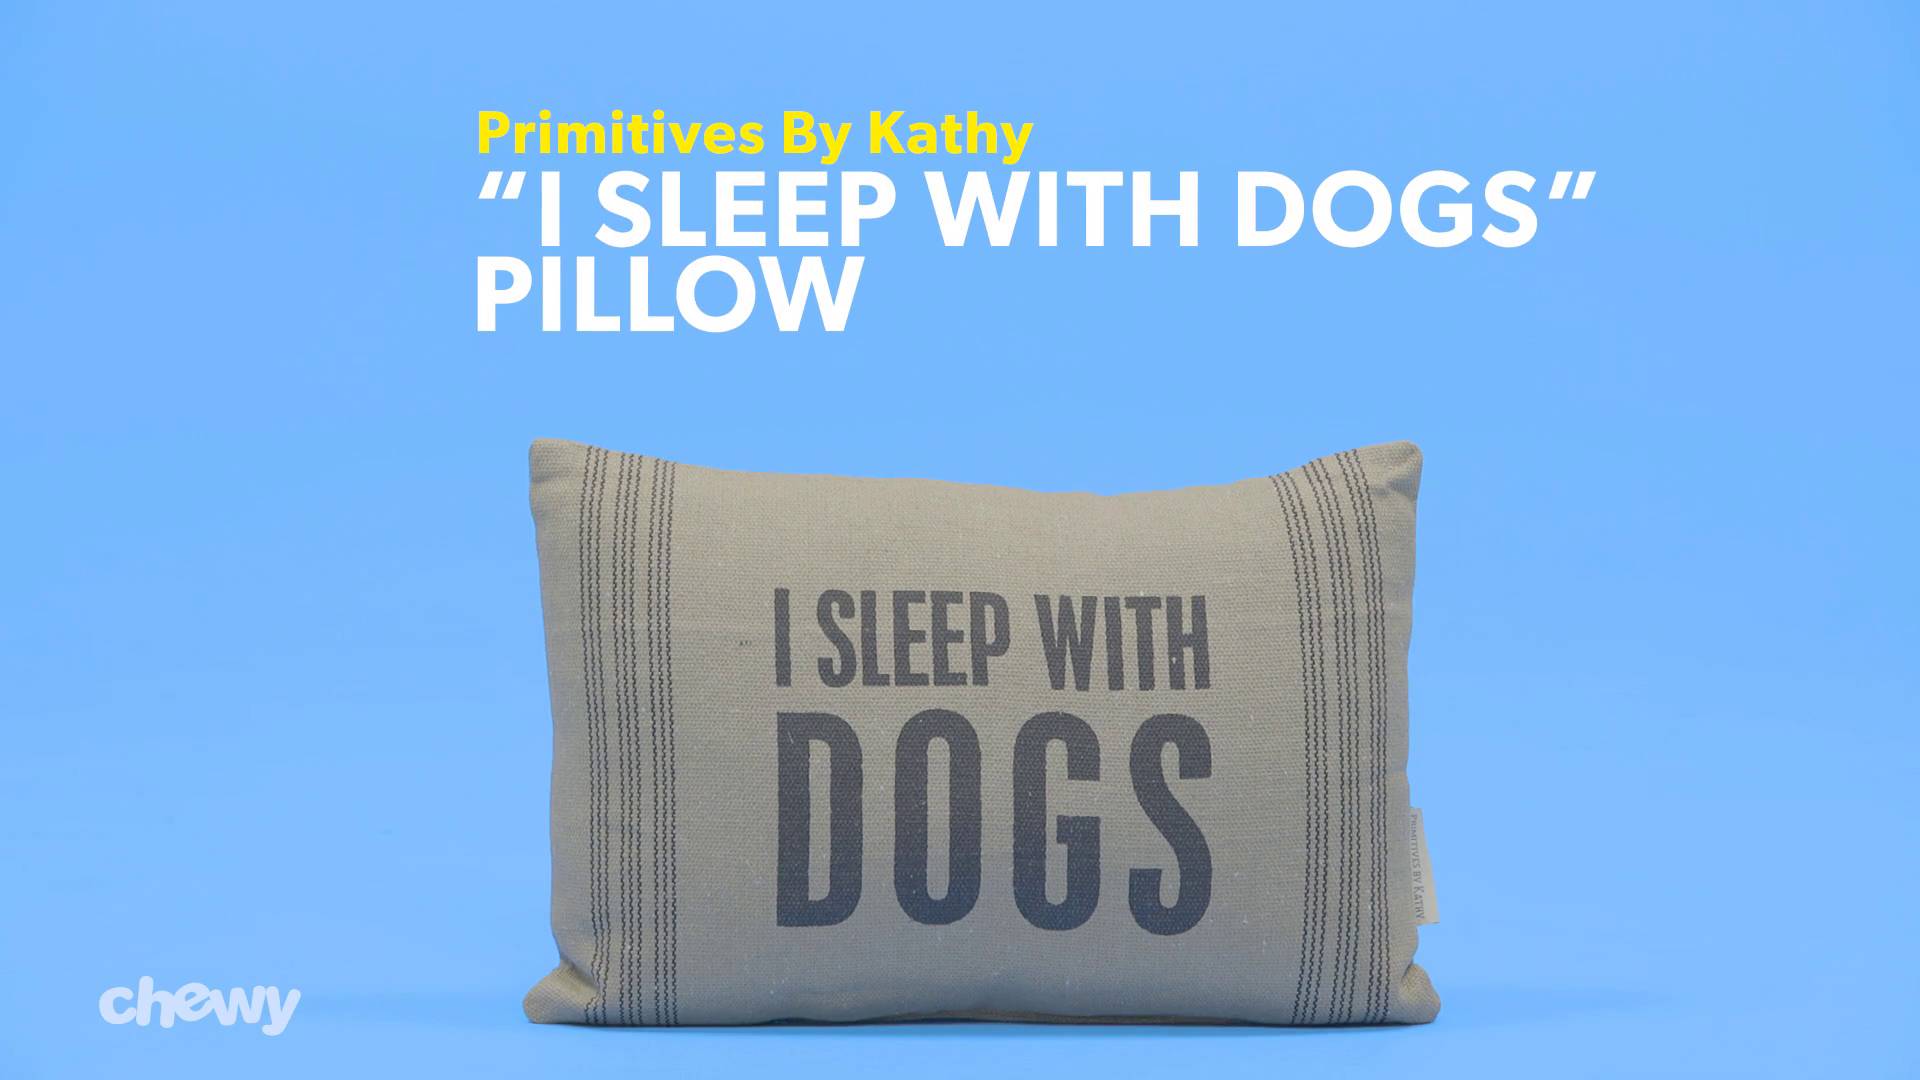 10-Inch by 15-Inch 22561 Primitives by Kathy with Dogs Dark Pillow